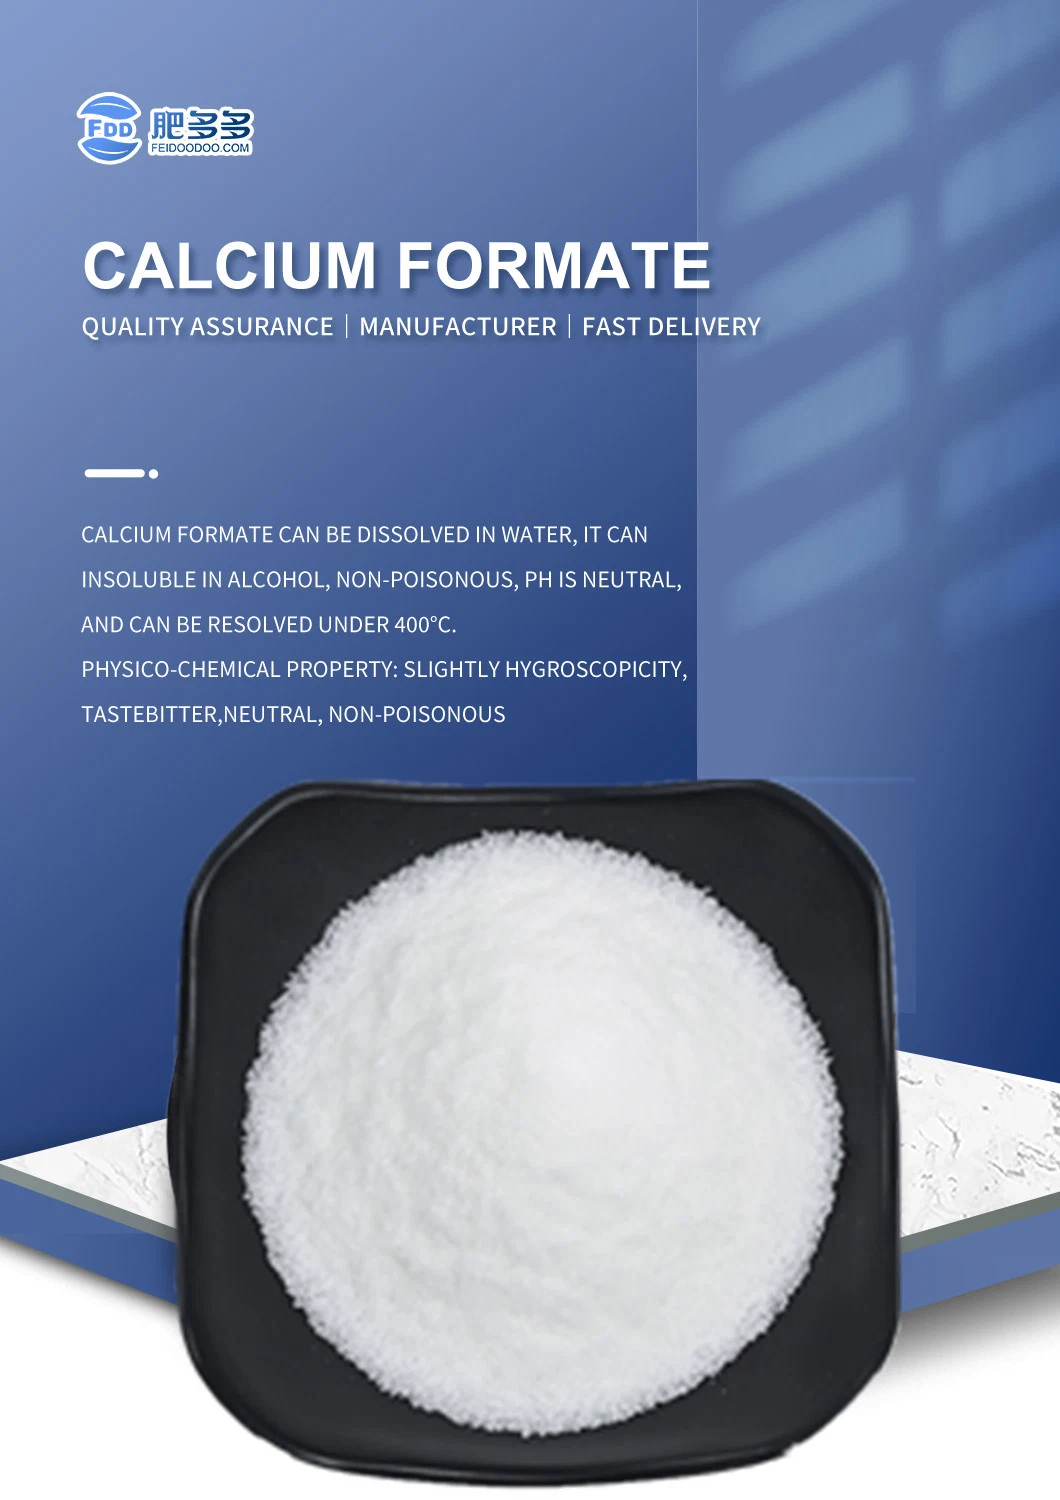 HS Code 29151200 Calcium Formate Large Supplier in China